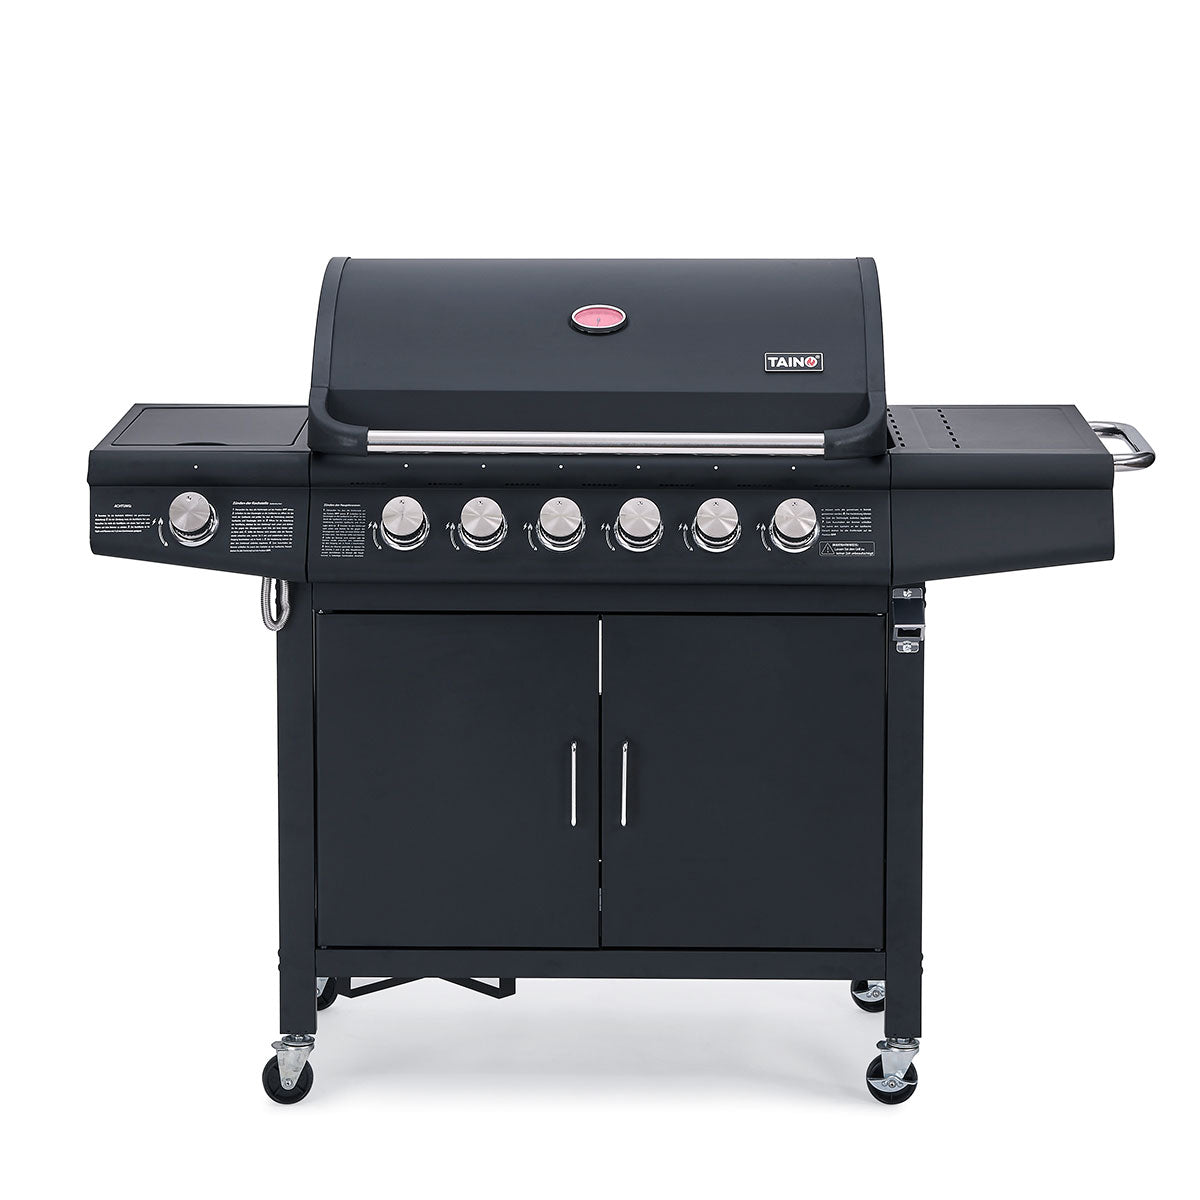 RED 6+1 Gasgrill Set